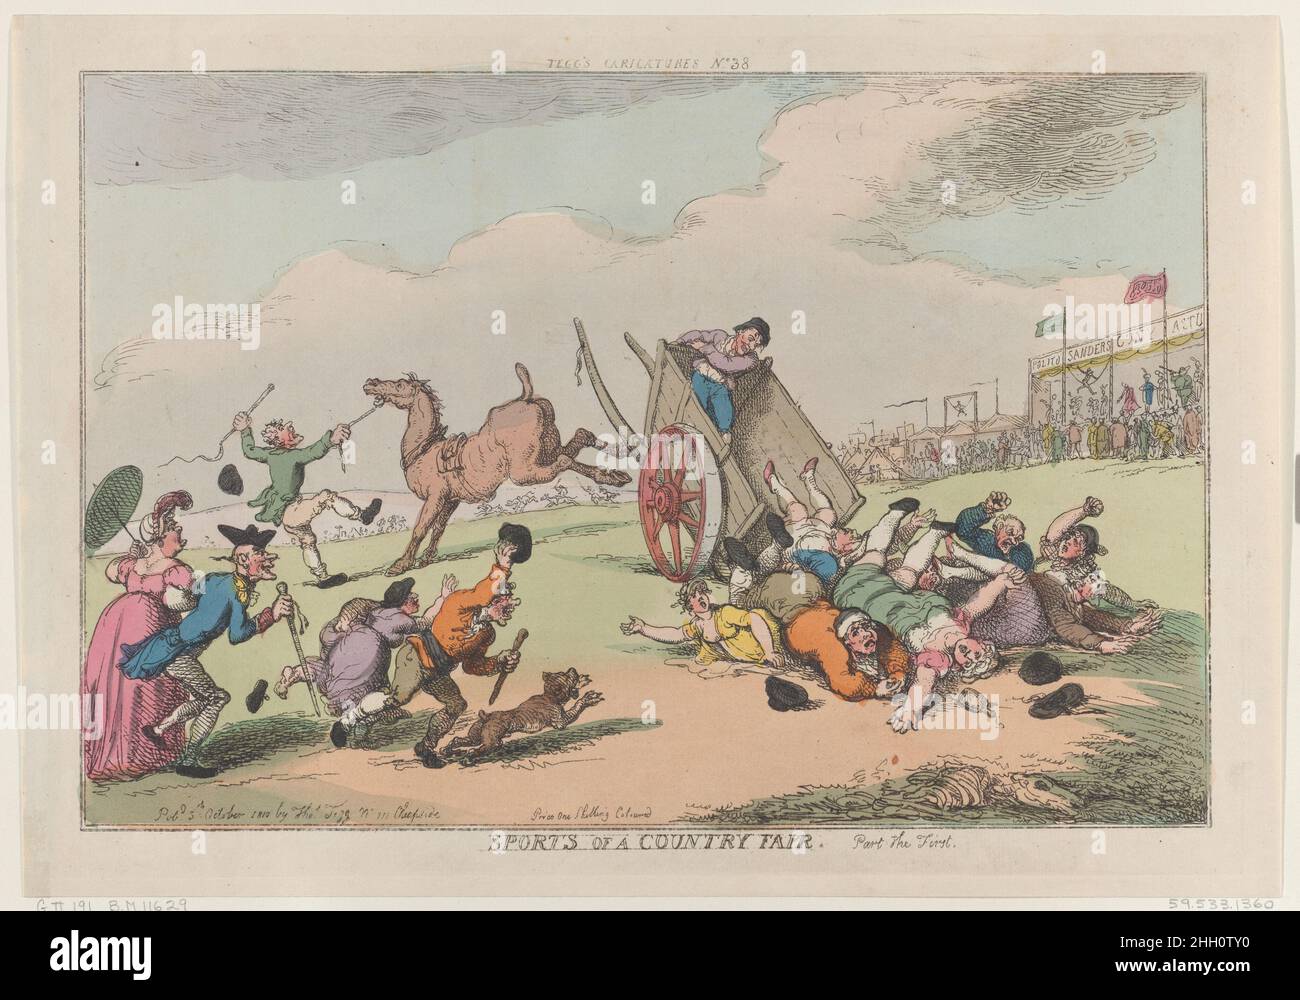 Sports of a Country Fair, Part the First October 5, 1810 Thomas Rowlandson A horse has broken loose from a two-wheeled cart, which is packed with visitors to the fair, who have been thrown onto the ground. The fair booths are in the background at right.. Sports of a Country Fair, Part the First. Thomas Rowlandson (British, London 1757–1827 London). October 5, 1810. Etching. Thomas Tegg (British, 1776–1846). Prints Stock Photo